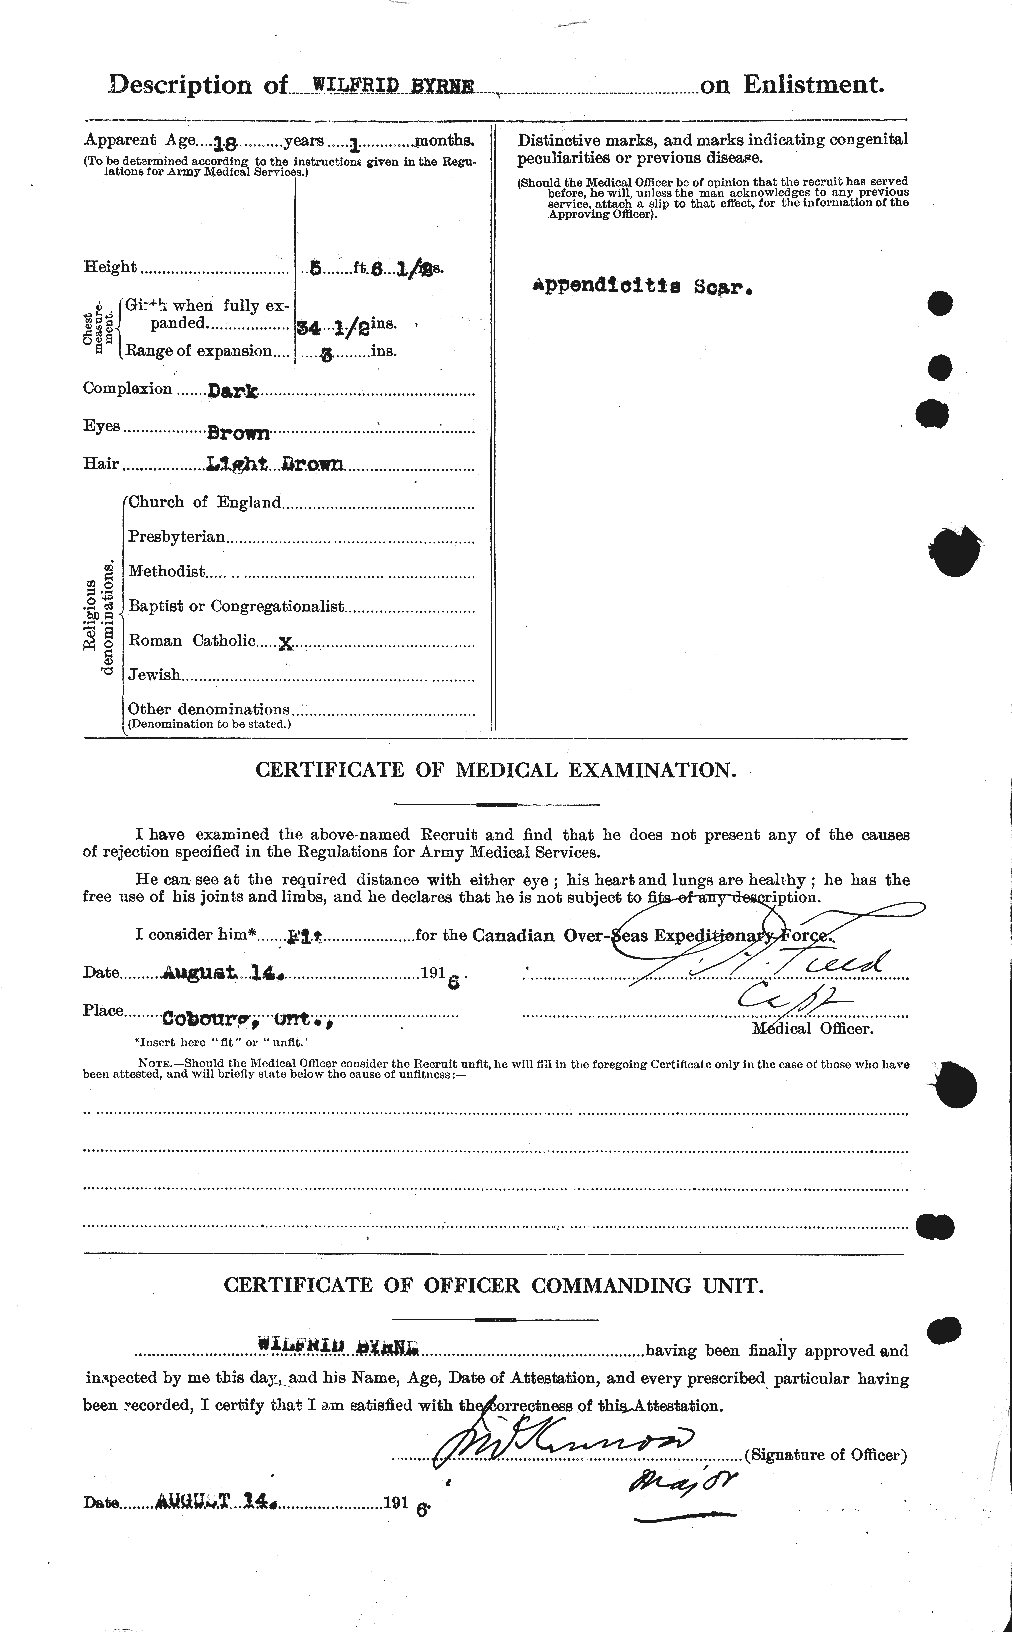 Personnel Records of the First World War - CEF 277169b